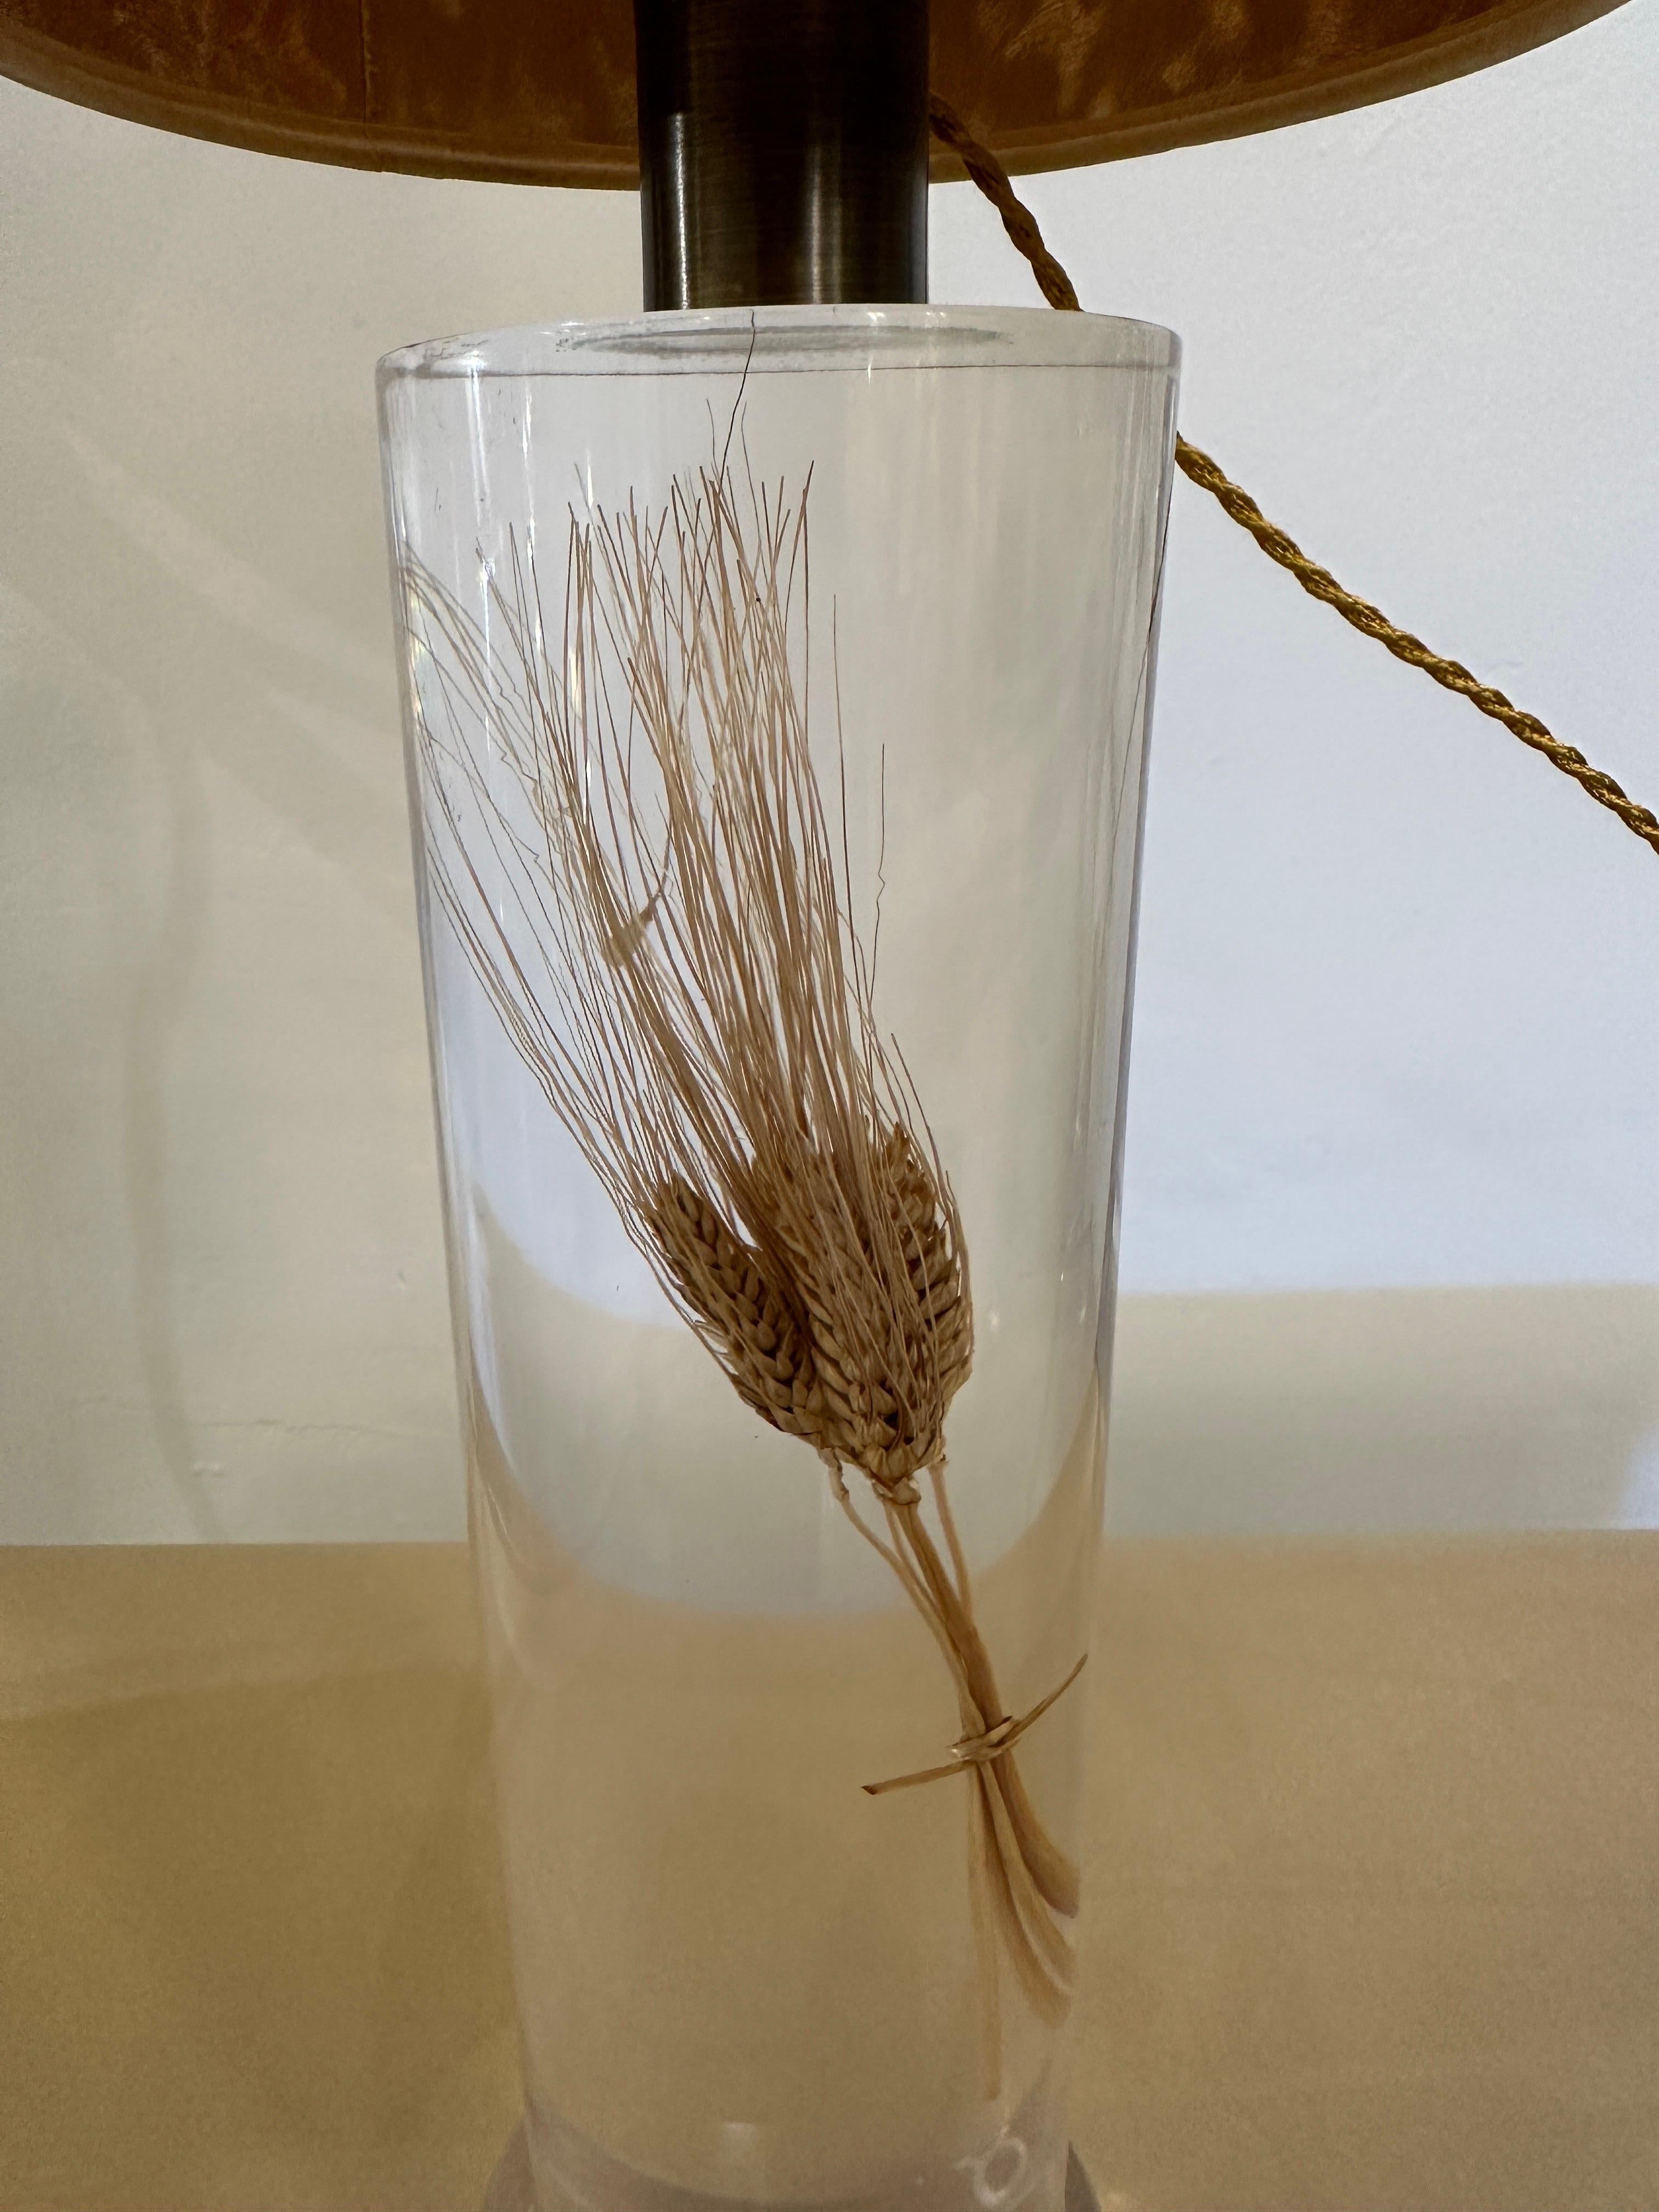 This lovely single French acrylic lamp by Pierre Giraudon features perfectly floating stalks of wheat in a cylinder and while illuminated they literally glow along with complimentary gold silk twist cable (newly rewired). The lamp and shade is